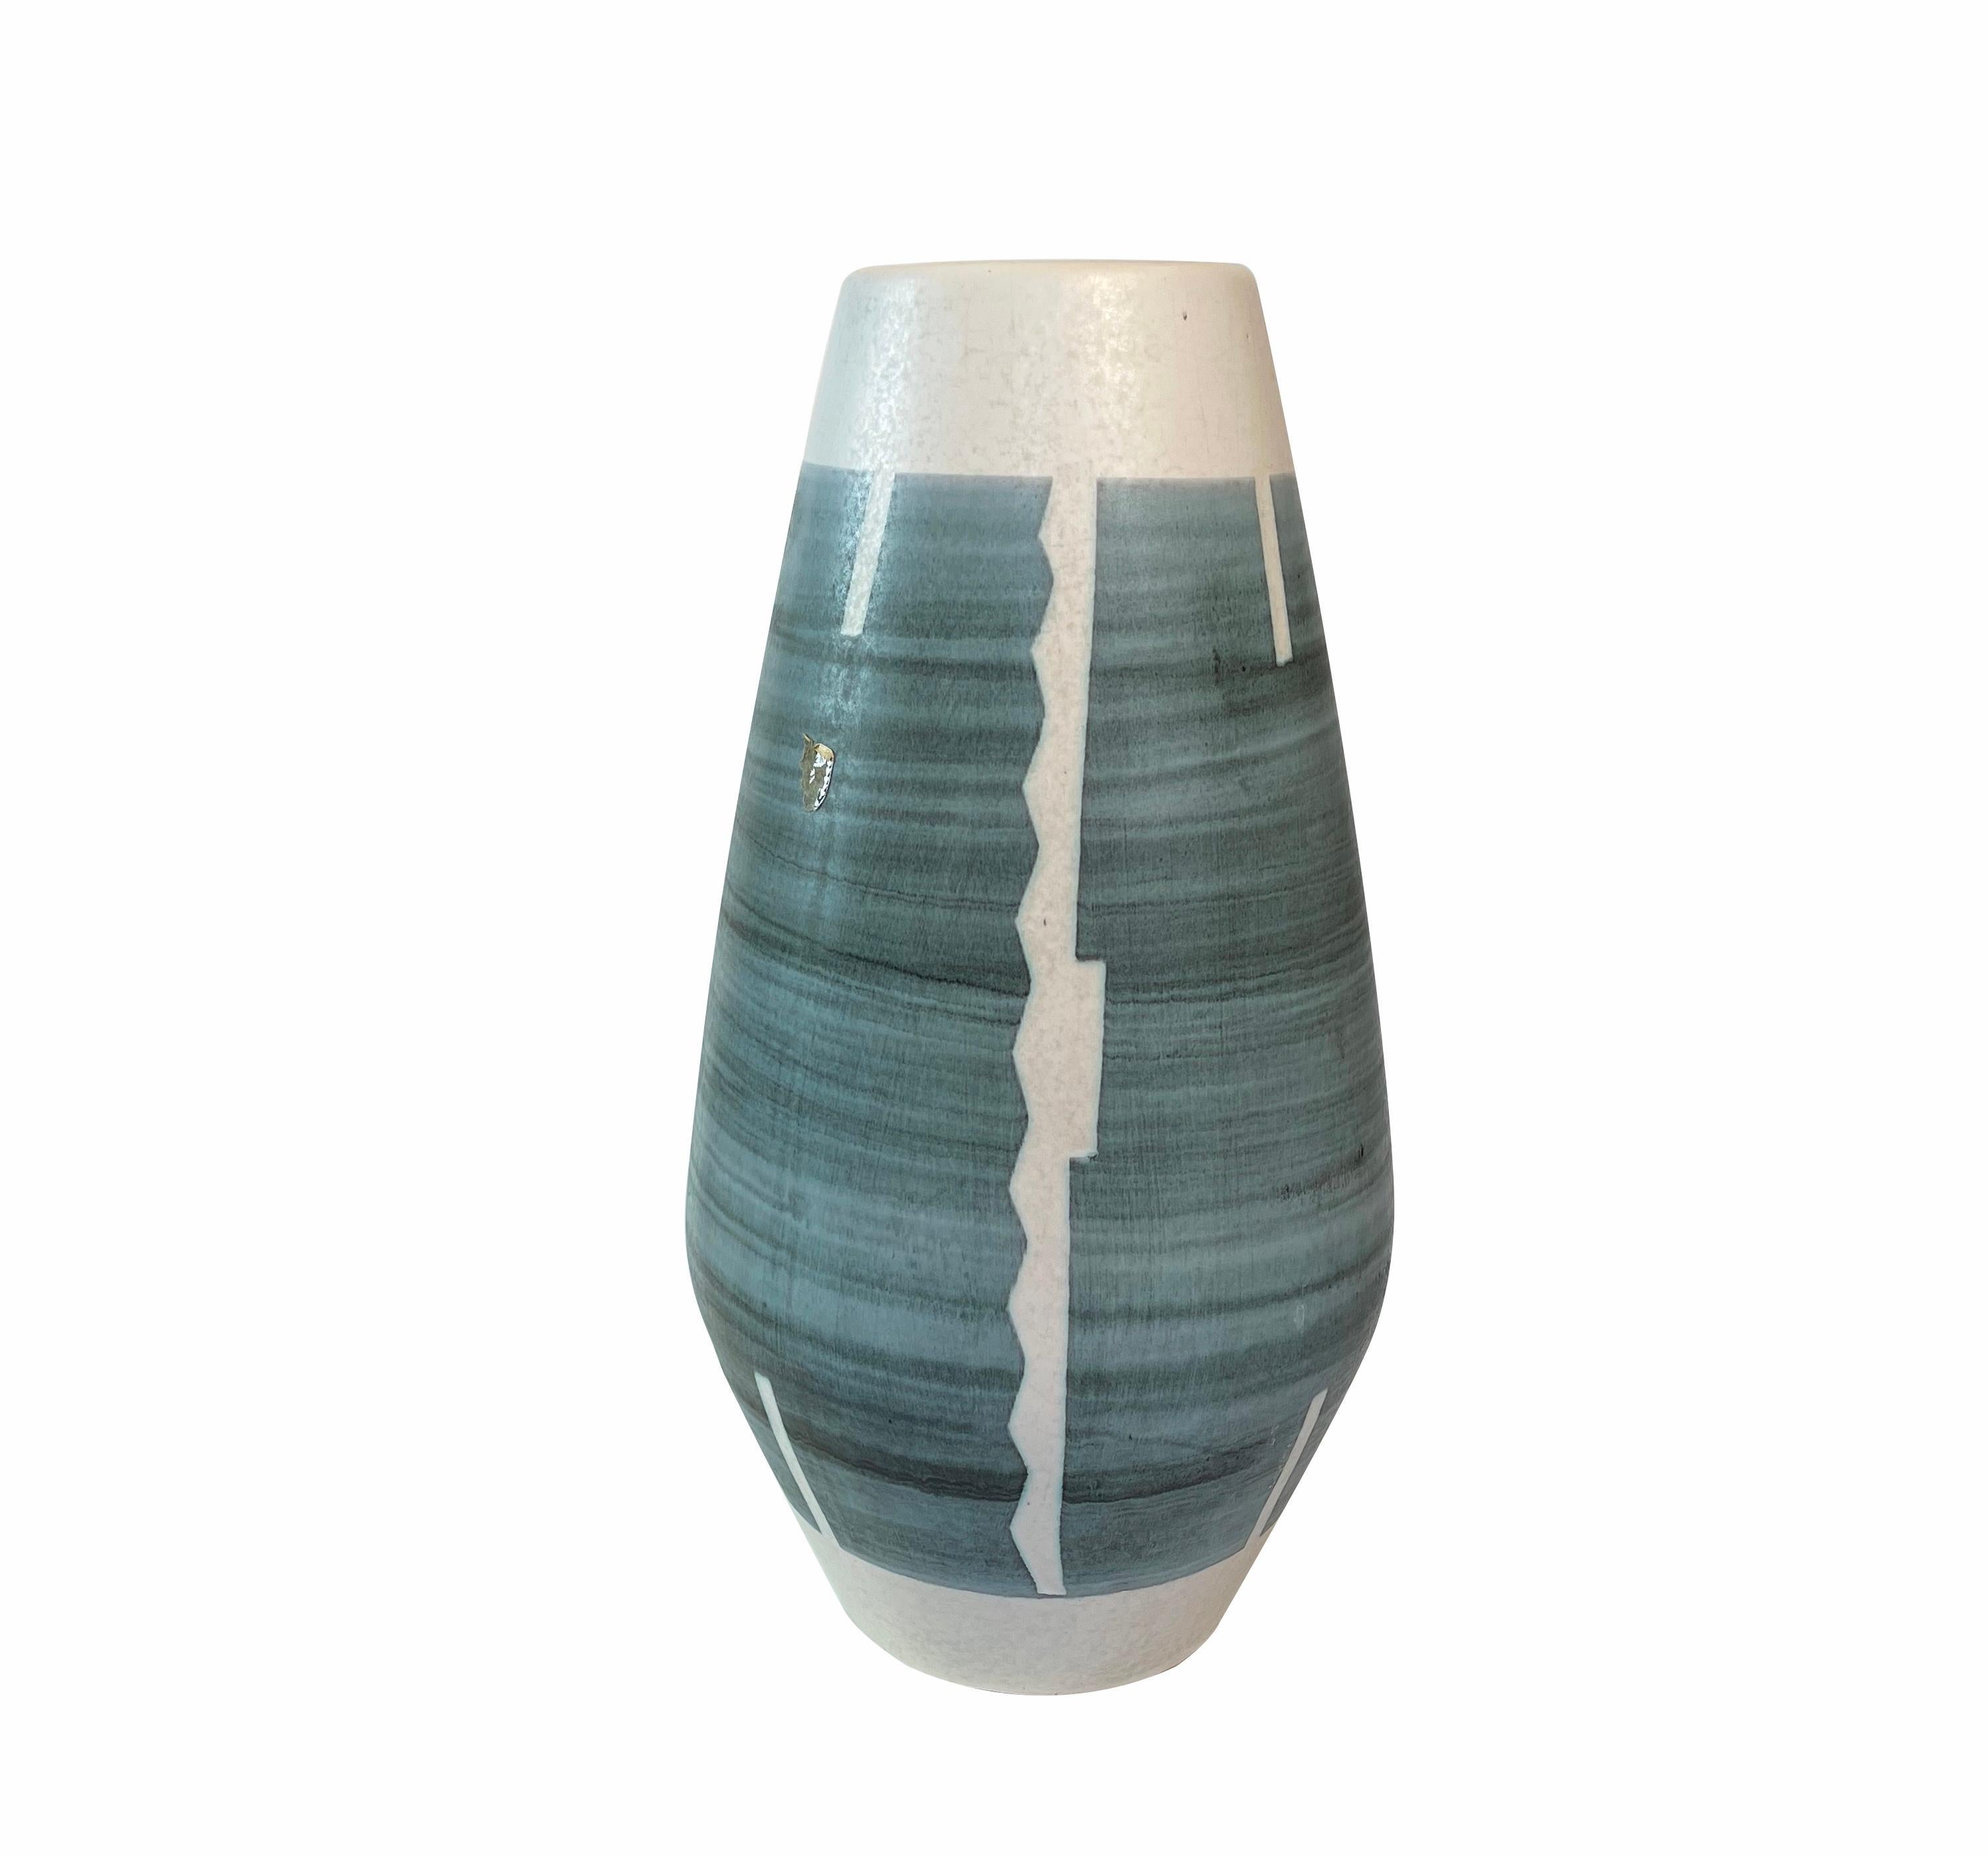 Hand-Crafted Large Modernist Ethnic Type West German Floor Vase by Fohr Pottery, circa 1965